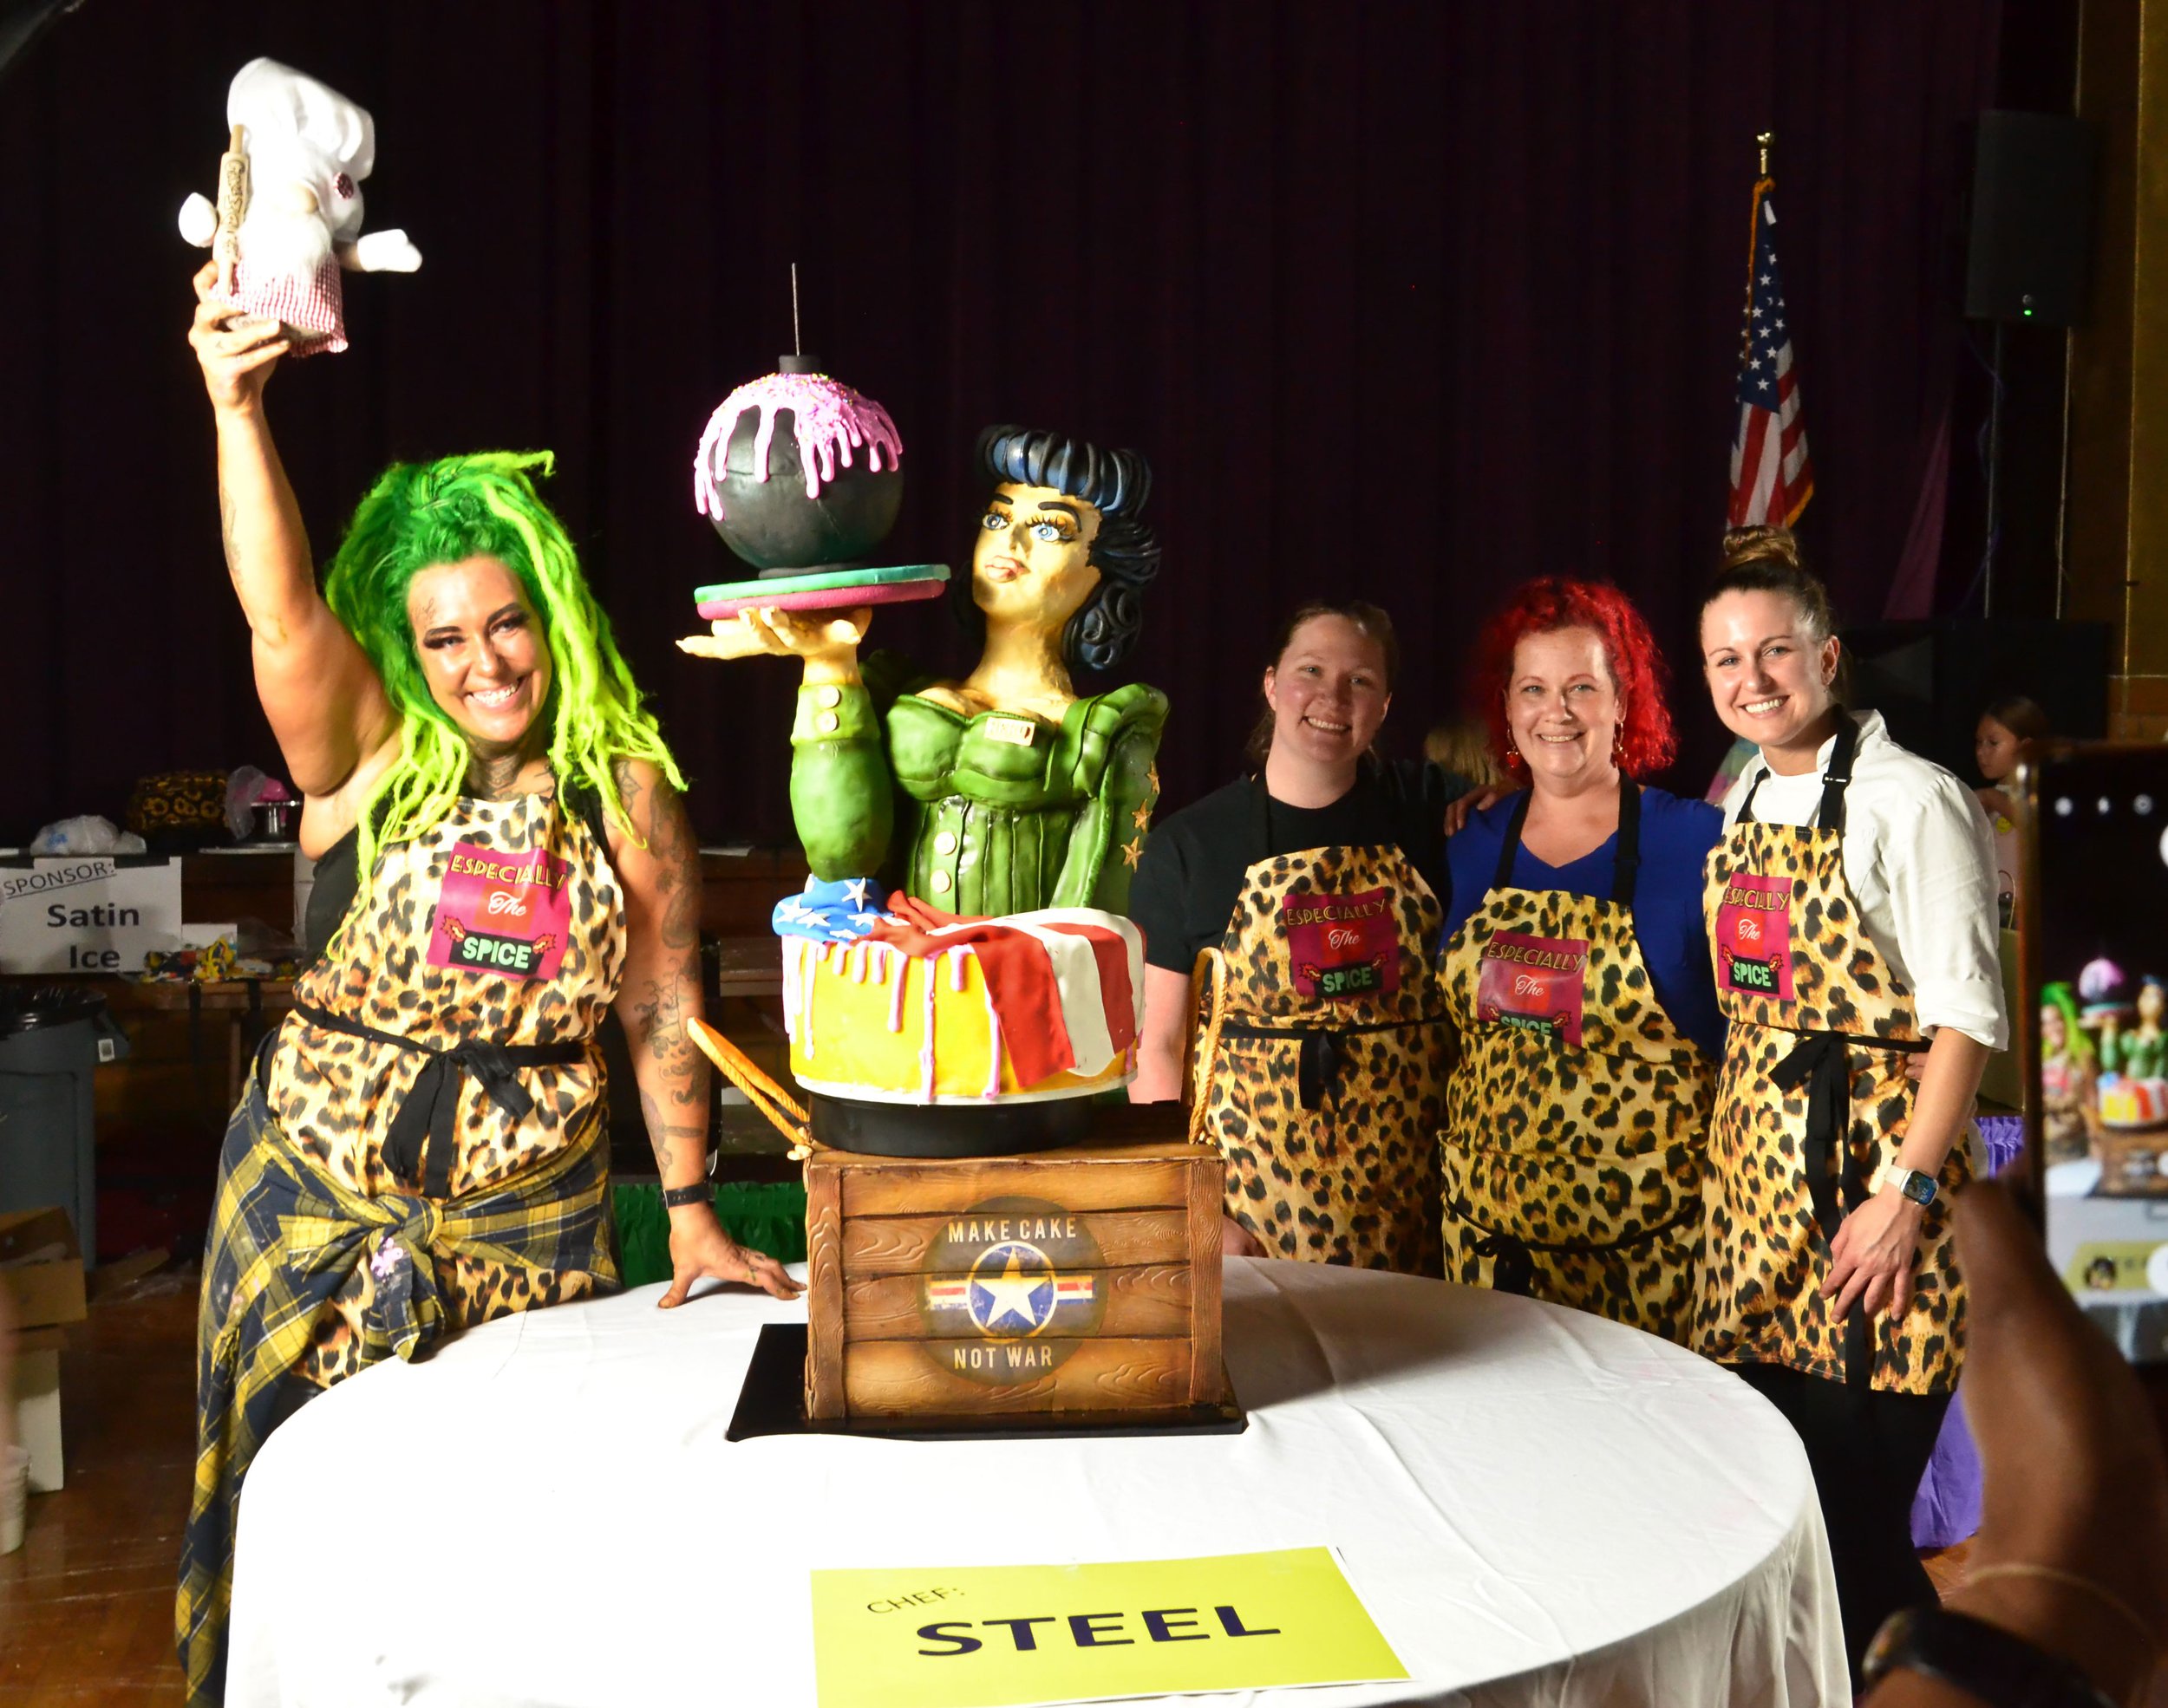 1st place -Pro chef "Steel"